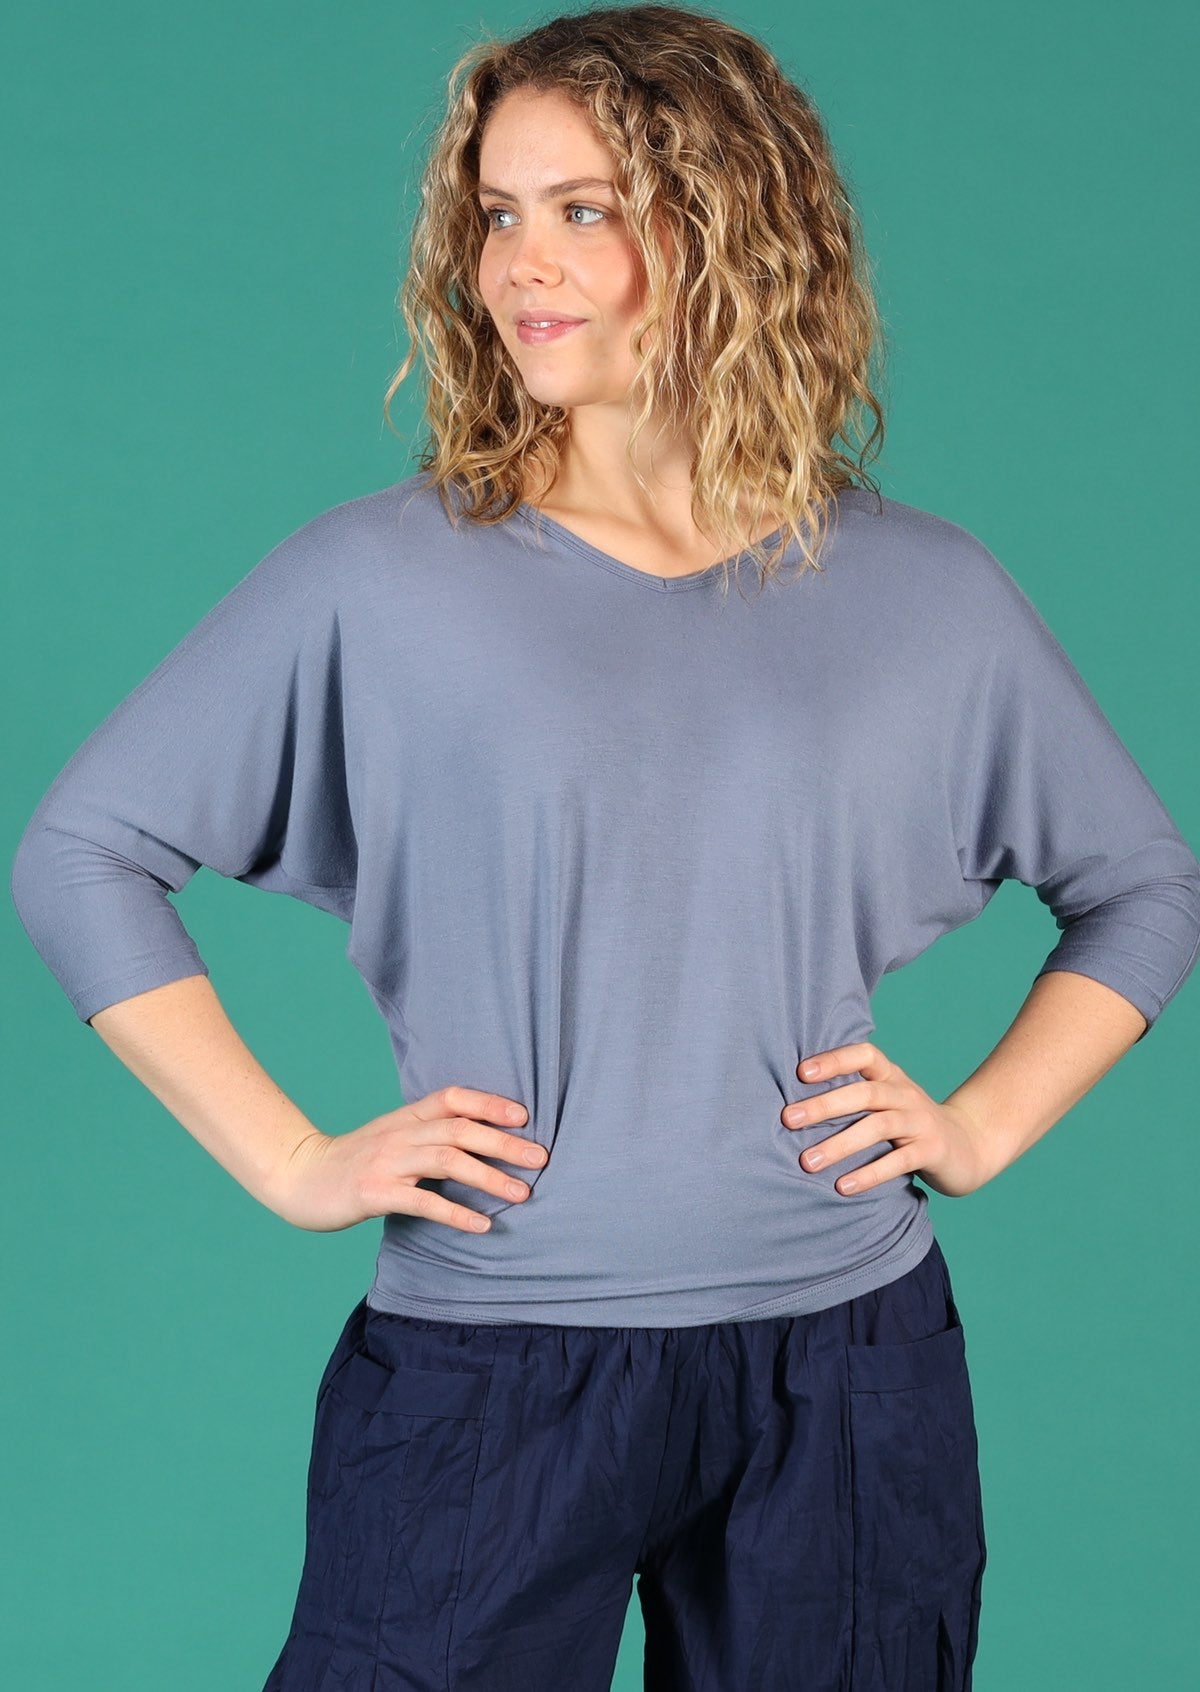 Woman wearing a 3/4 sleeve rayon batwing v-neck grey top with navy pants.